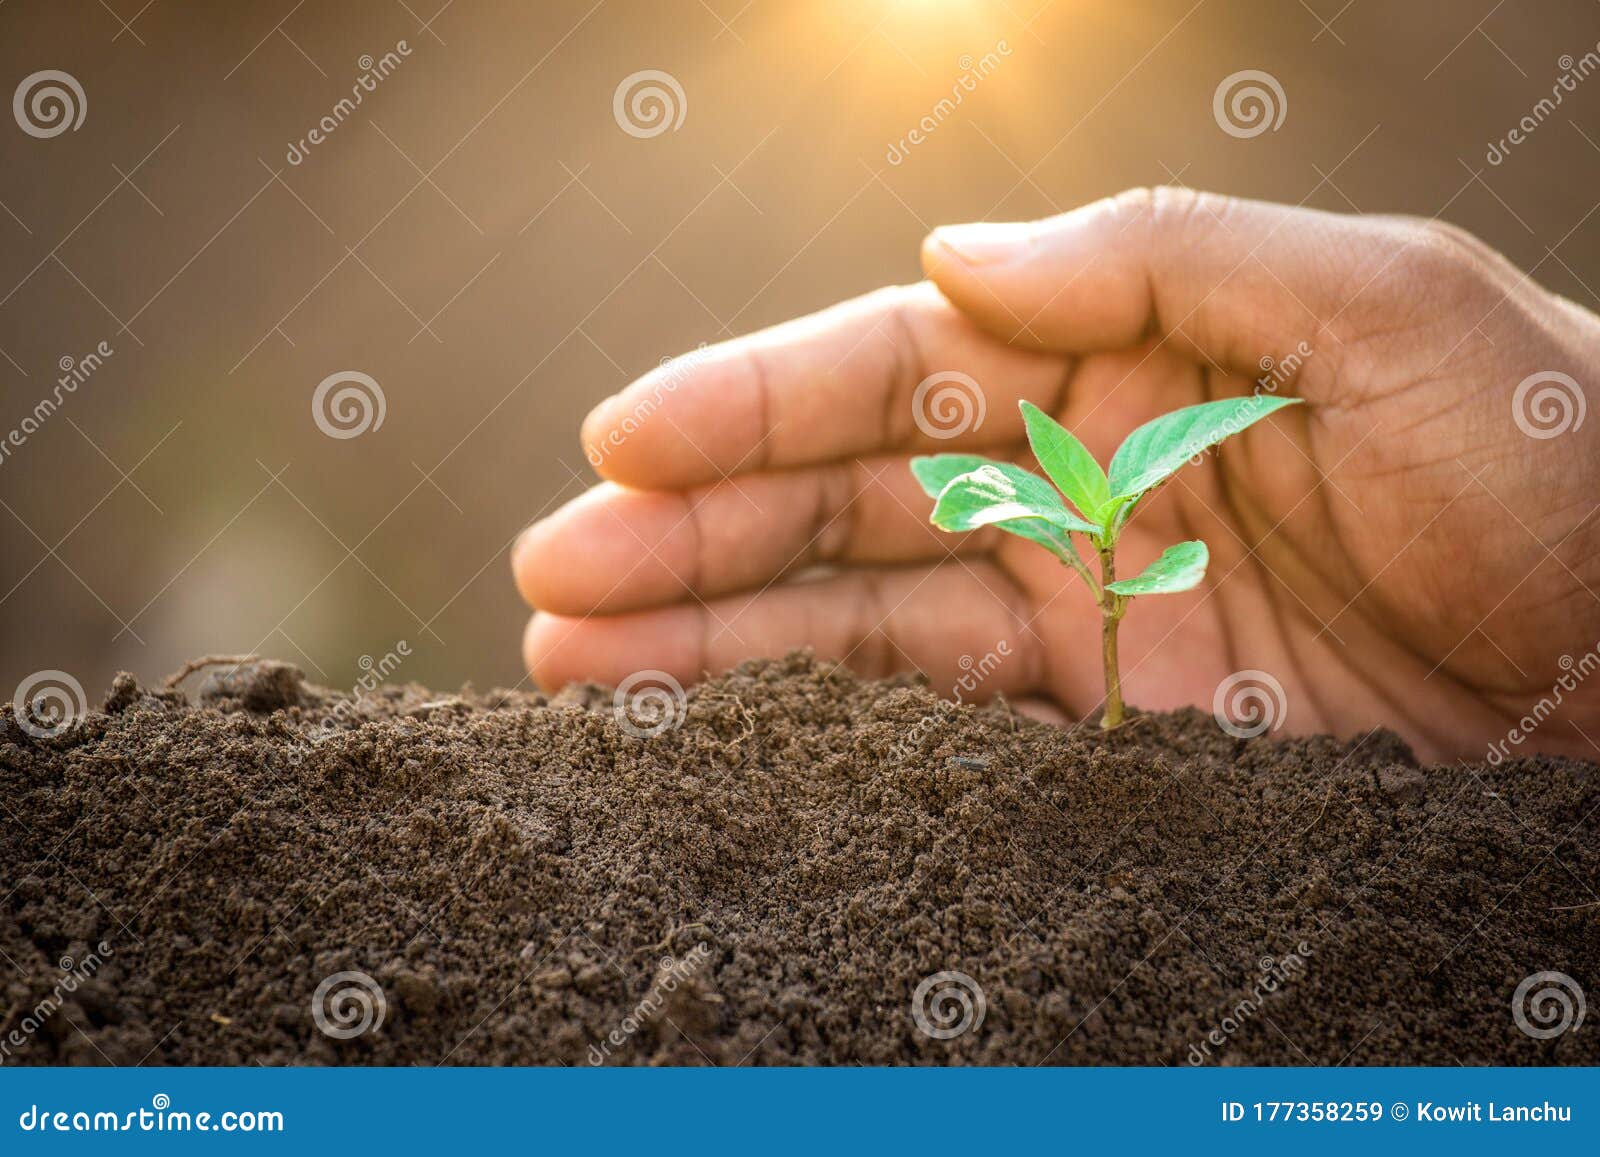 a hands protecting plant growing on soil.protect nature and environment concept.